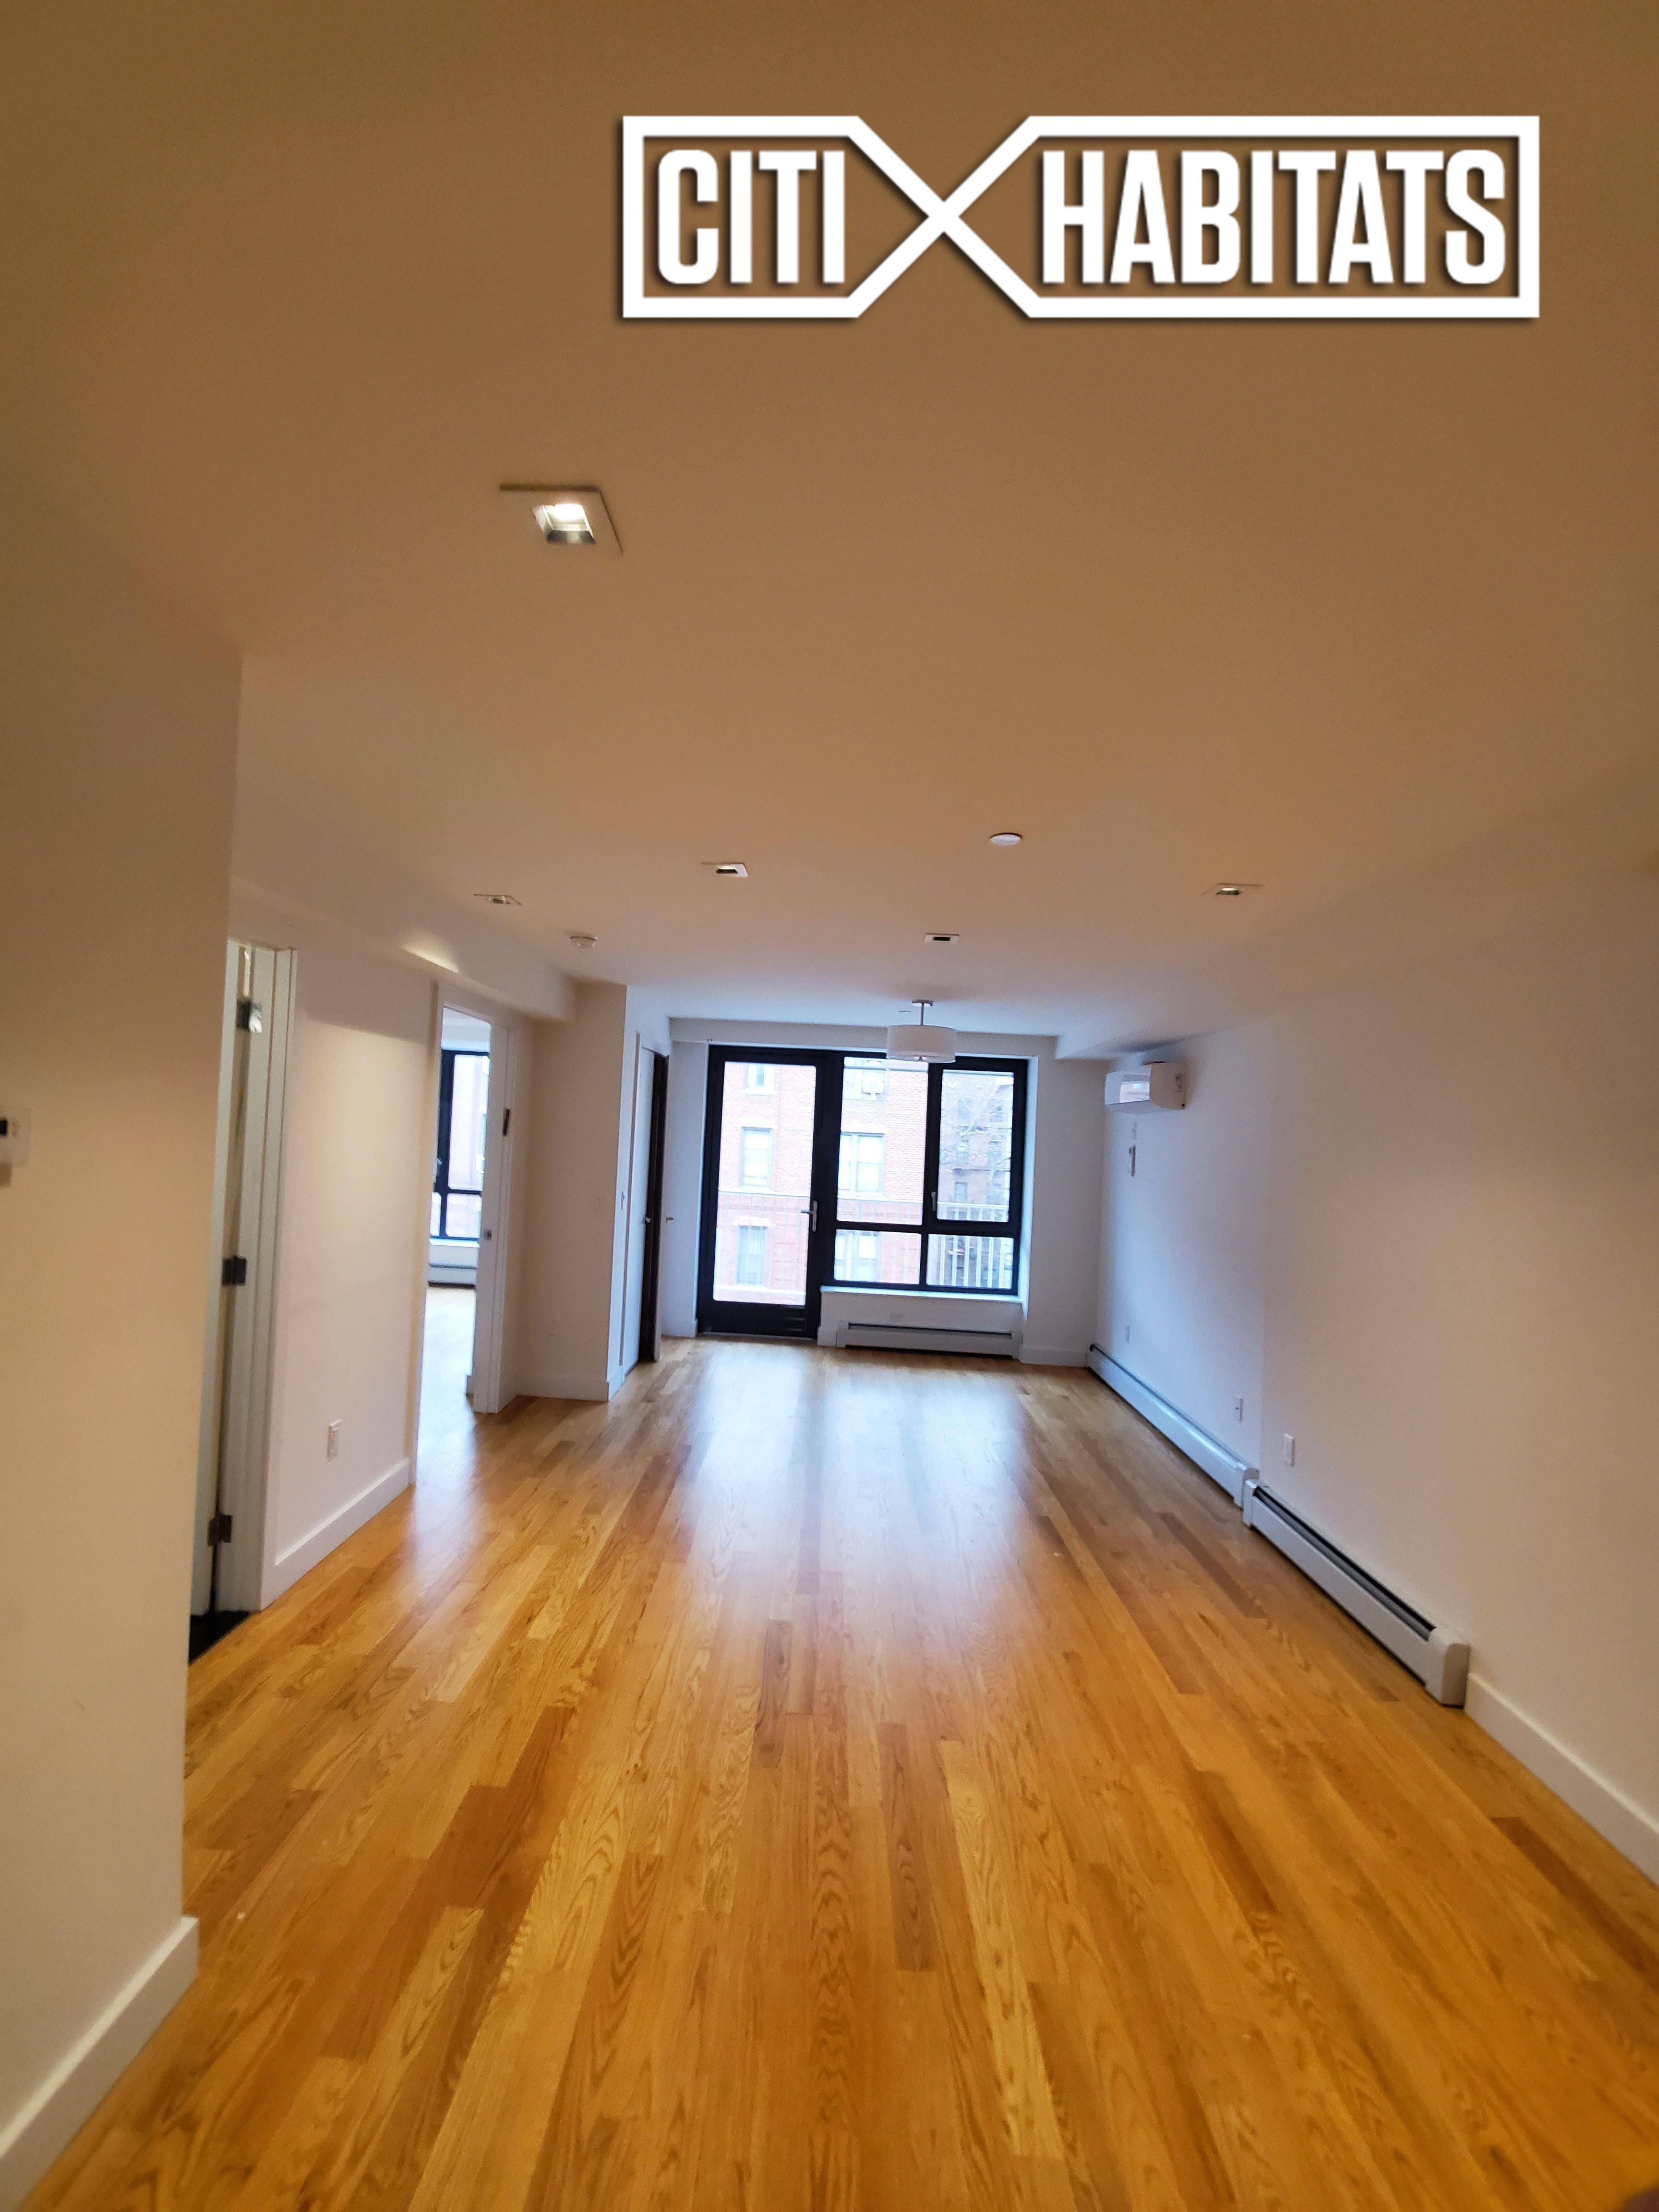 Modern Sleek 1 Bedroom ApartmentPrivate Outdoor SpaceGym and Shared RoofProfessional Management CompanyTons of Natural sunlightWasher and Dryer in Apartment.